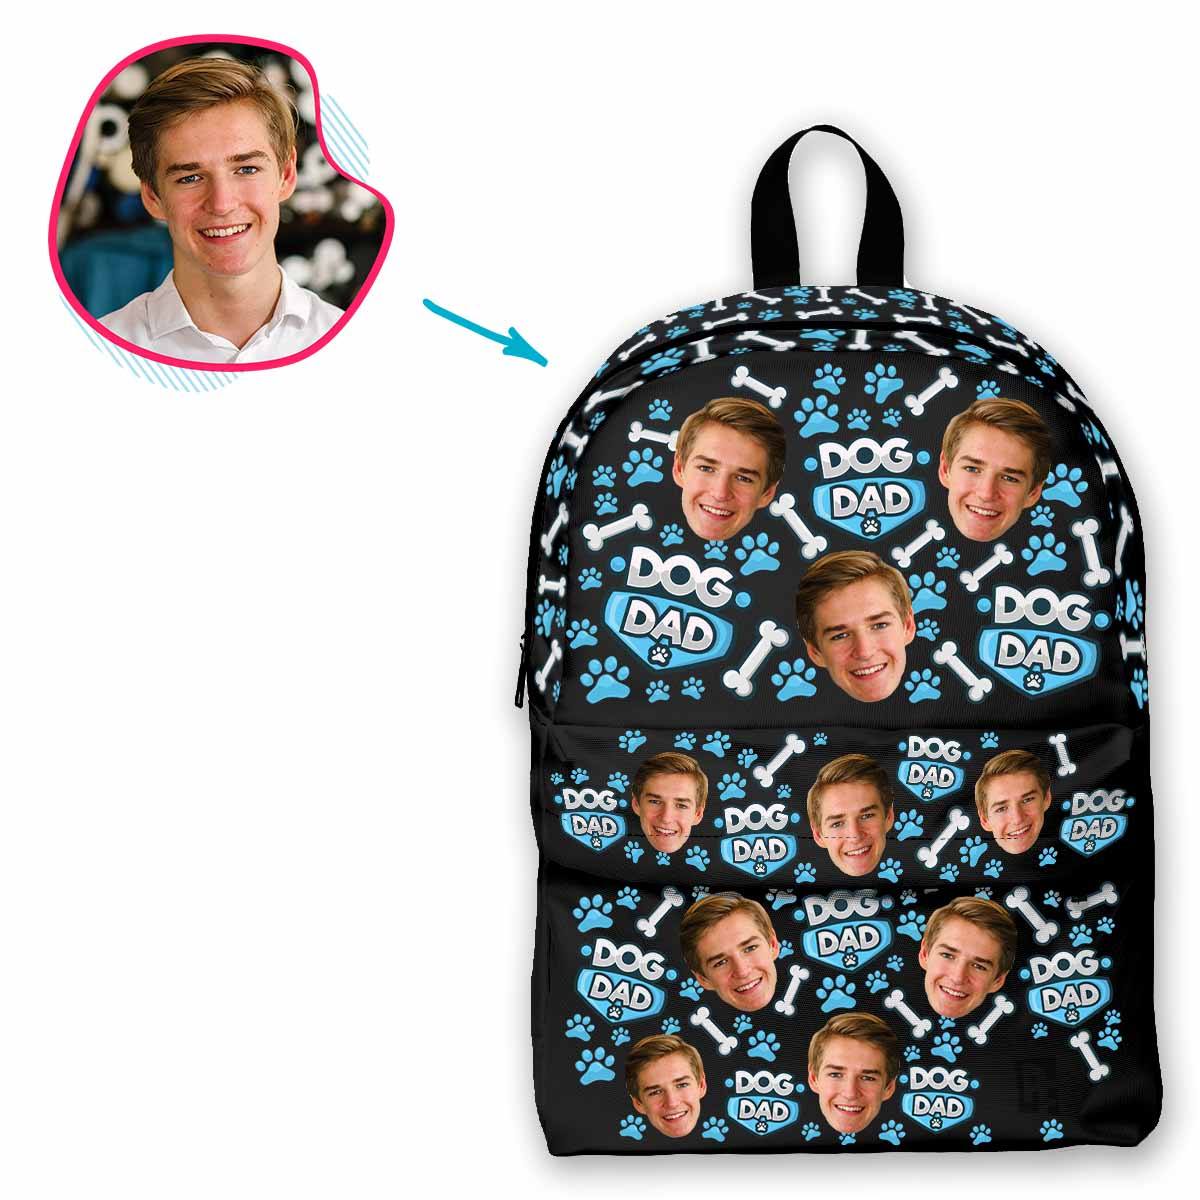 dark Dog Dad classic backpack personalized with photo of face printed on it